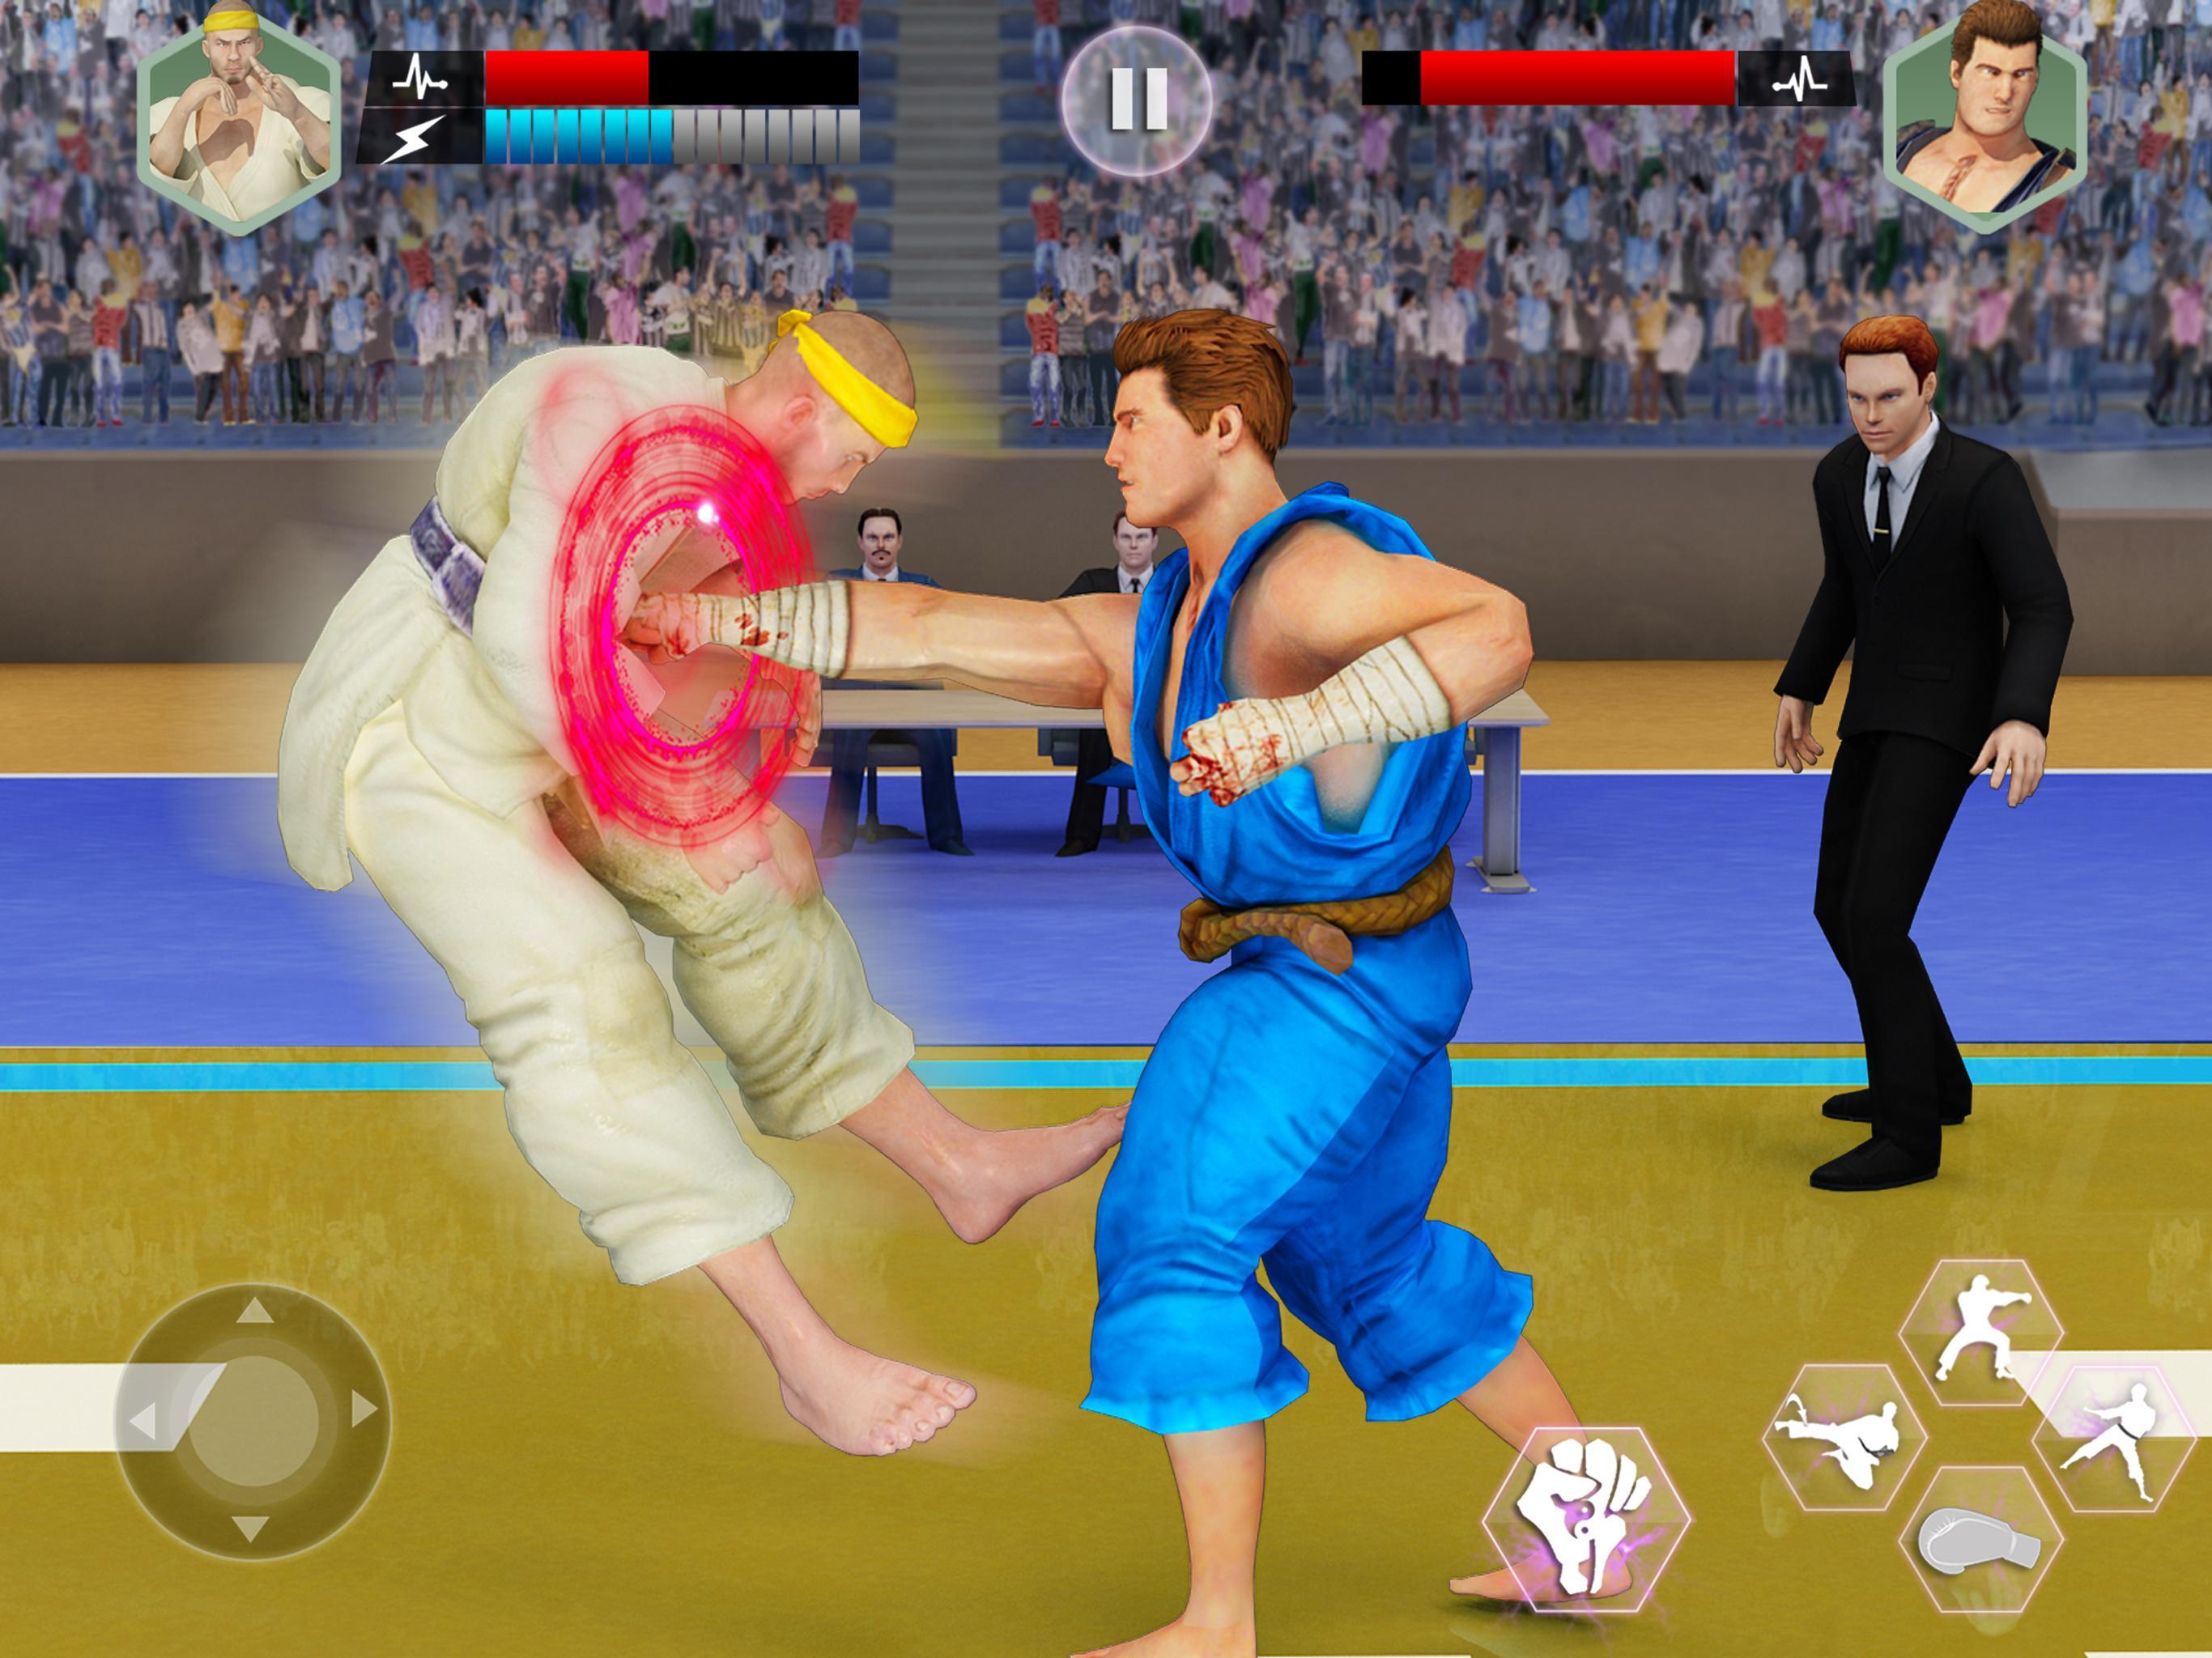 Kung Fu Fight King PRO: Real Karate Fighting Game for Android - APK